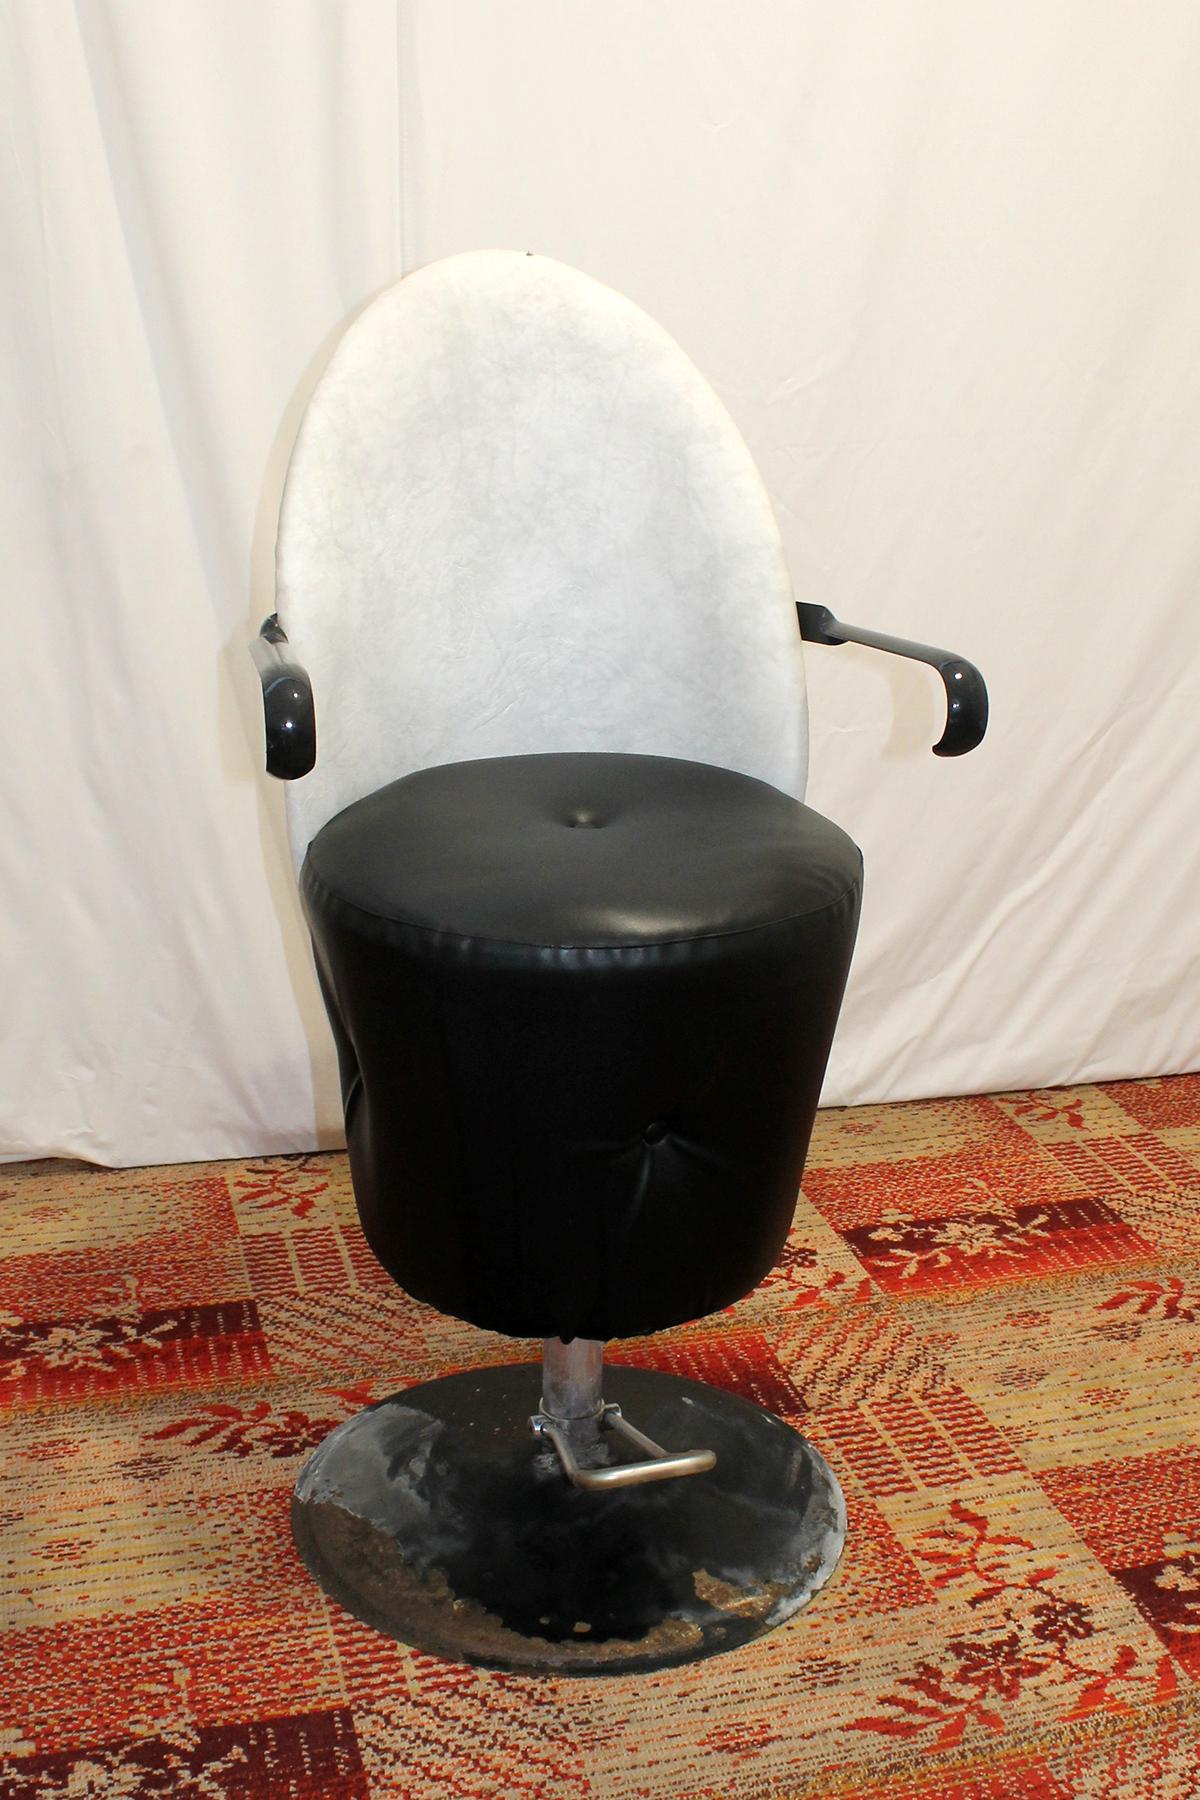 Vintage Leather swivel hairdressing salon chair from the 1980's. It was made in the former Czechoslovakia and used in a hair salon.
The armchair is functional, the hydraulics are working, and the seat with backrest has the ability to move. The